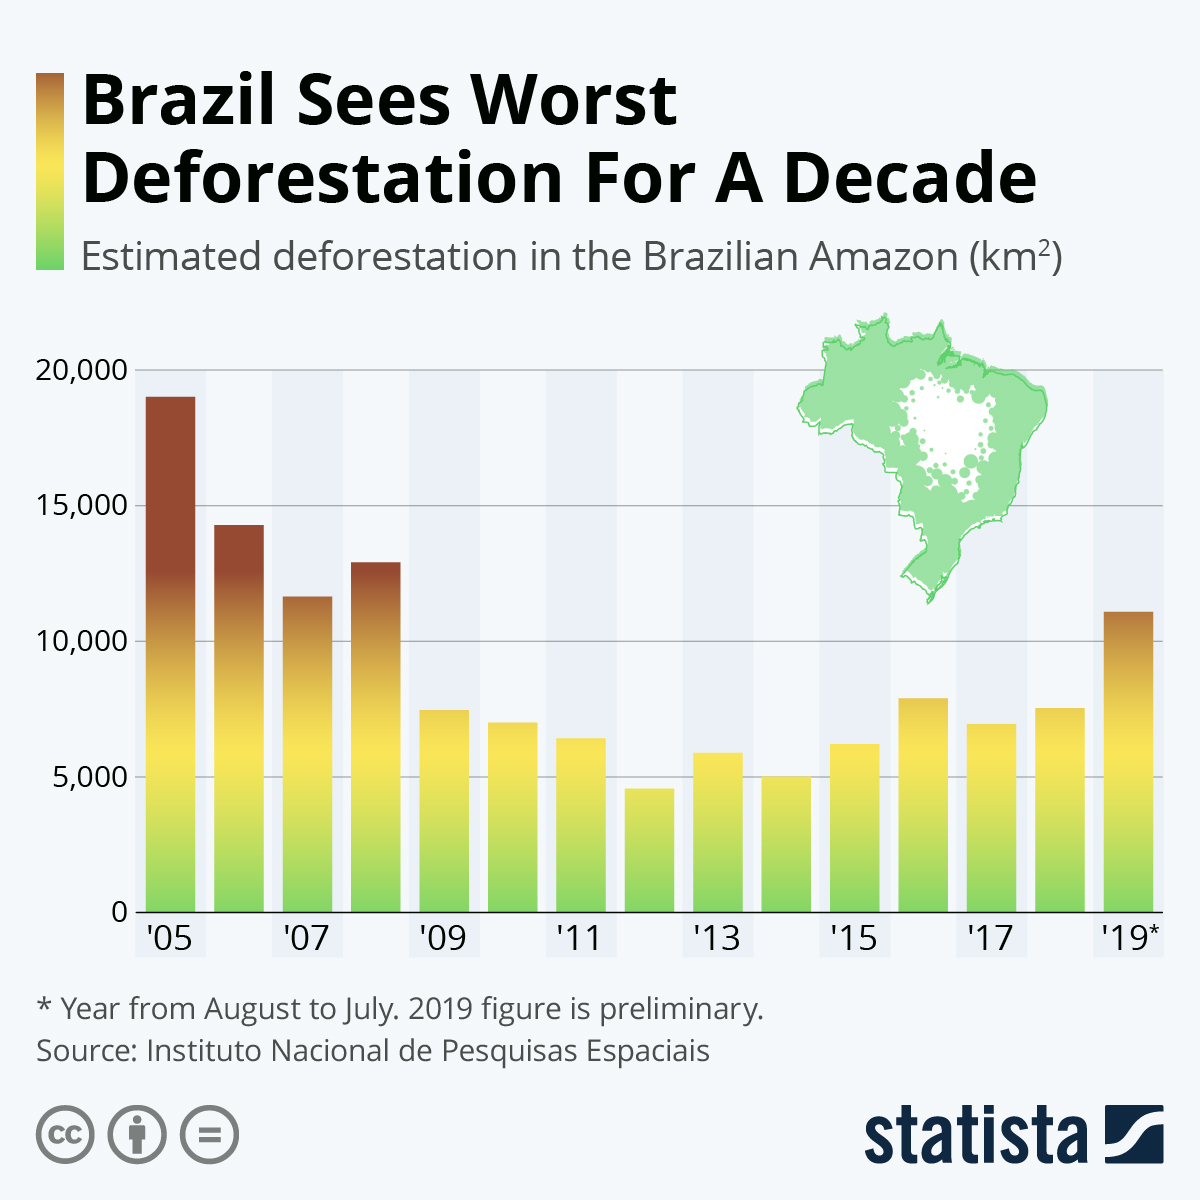 A bar graph shows estimated deforestation in the Brazilian Amazon from 2005 to 2019